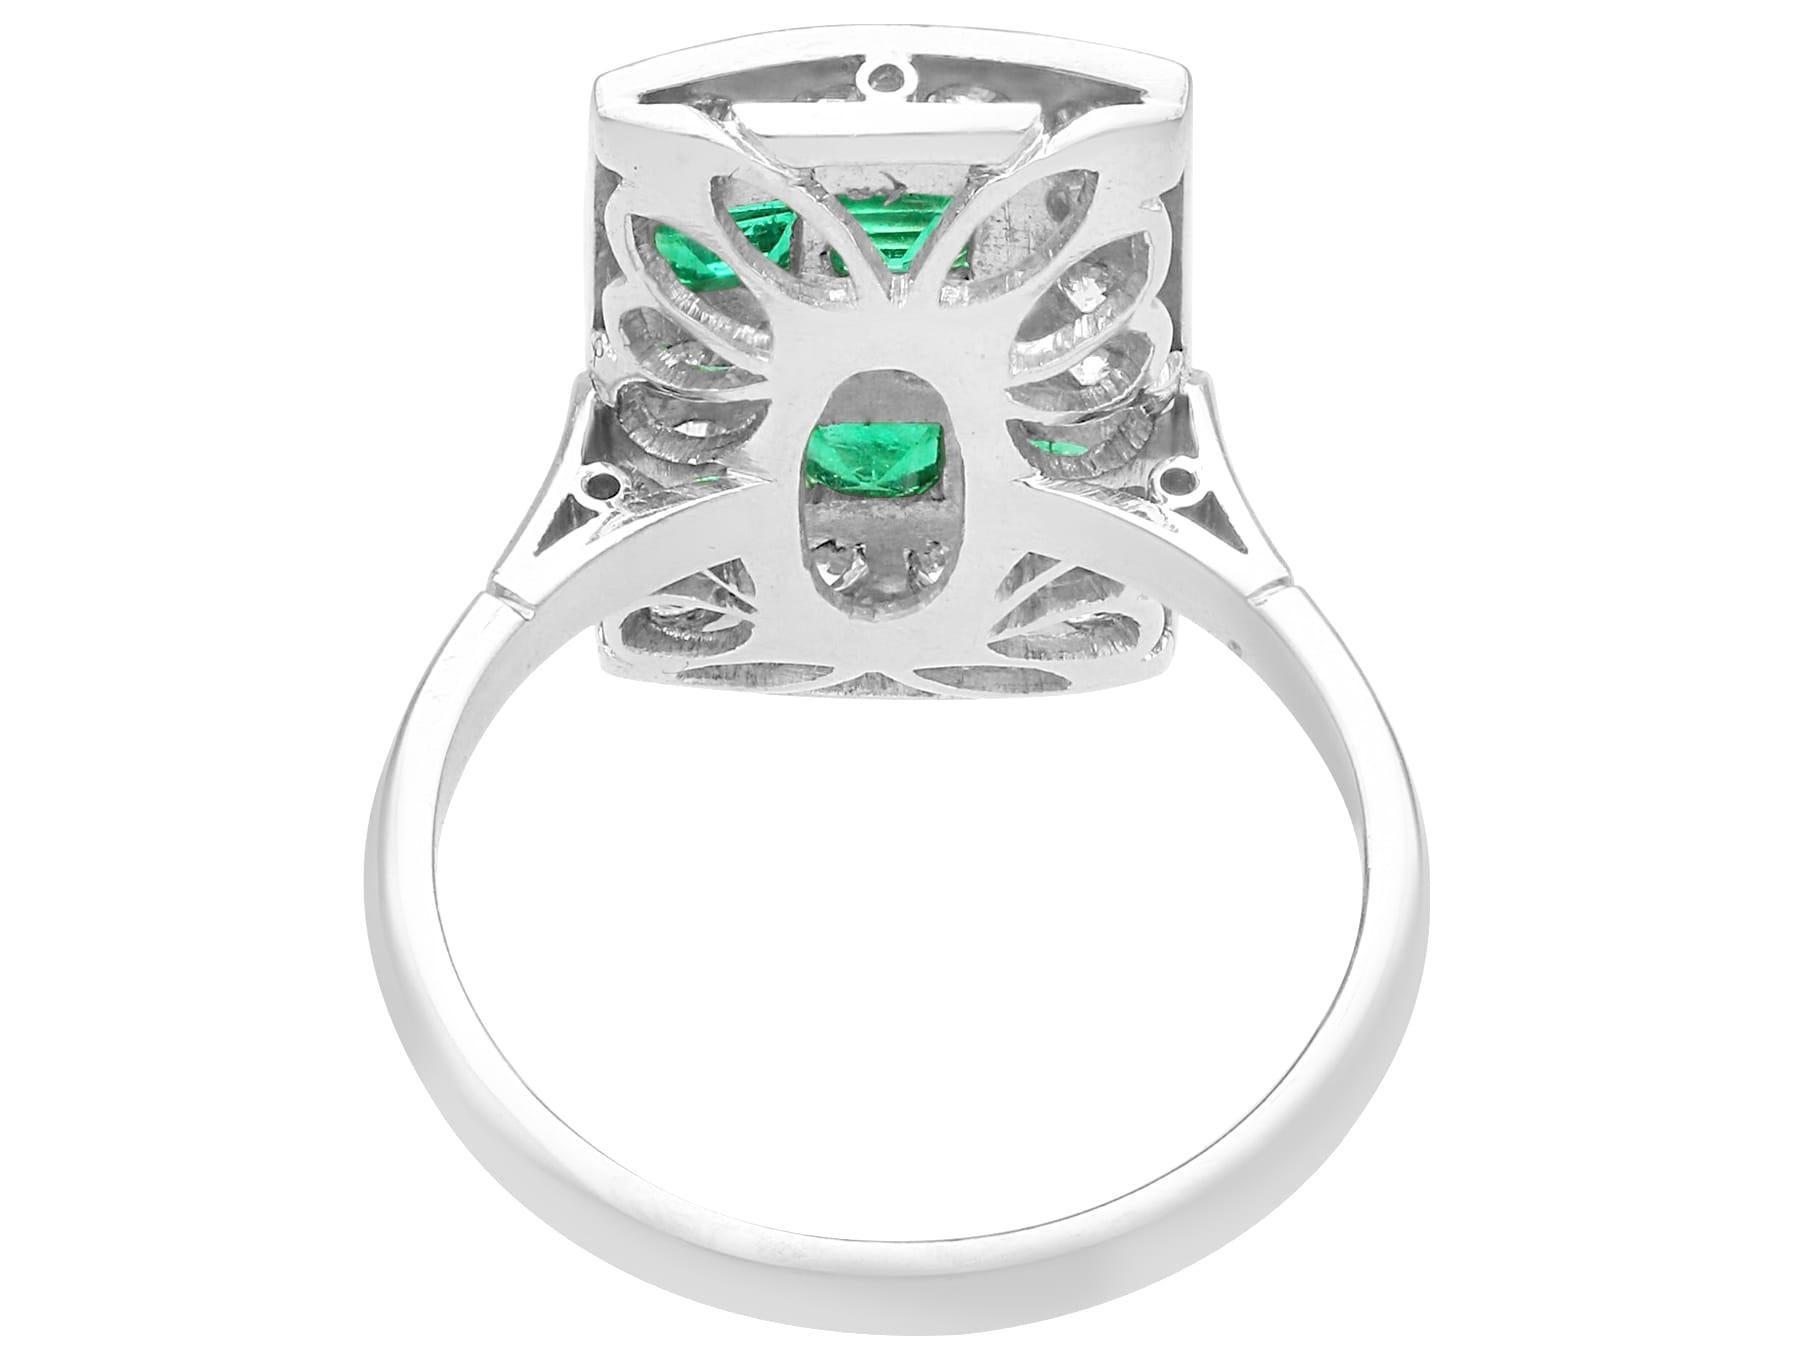 Art Deco 0.48 Carat Emerald and 1.12 Carat Diamond Platinum Cocktail Ring In Excellent Condition For Sale In Jesmond, Newcastle Upon Tyne